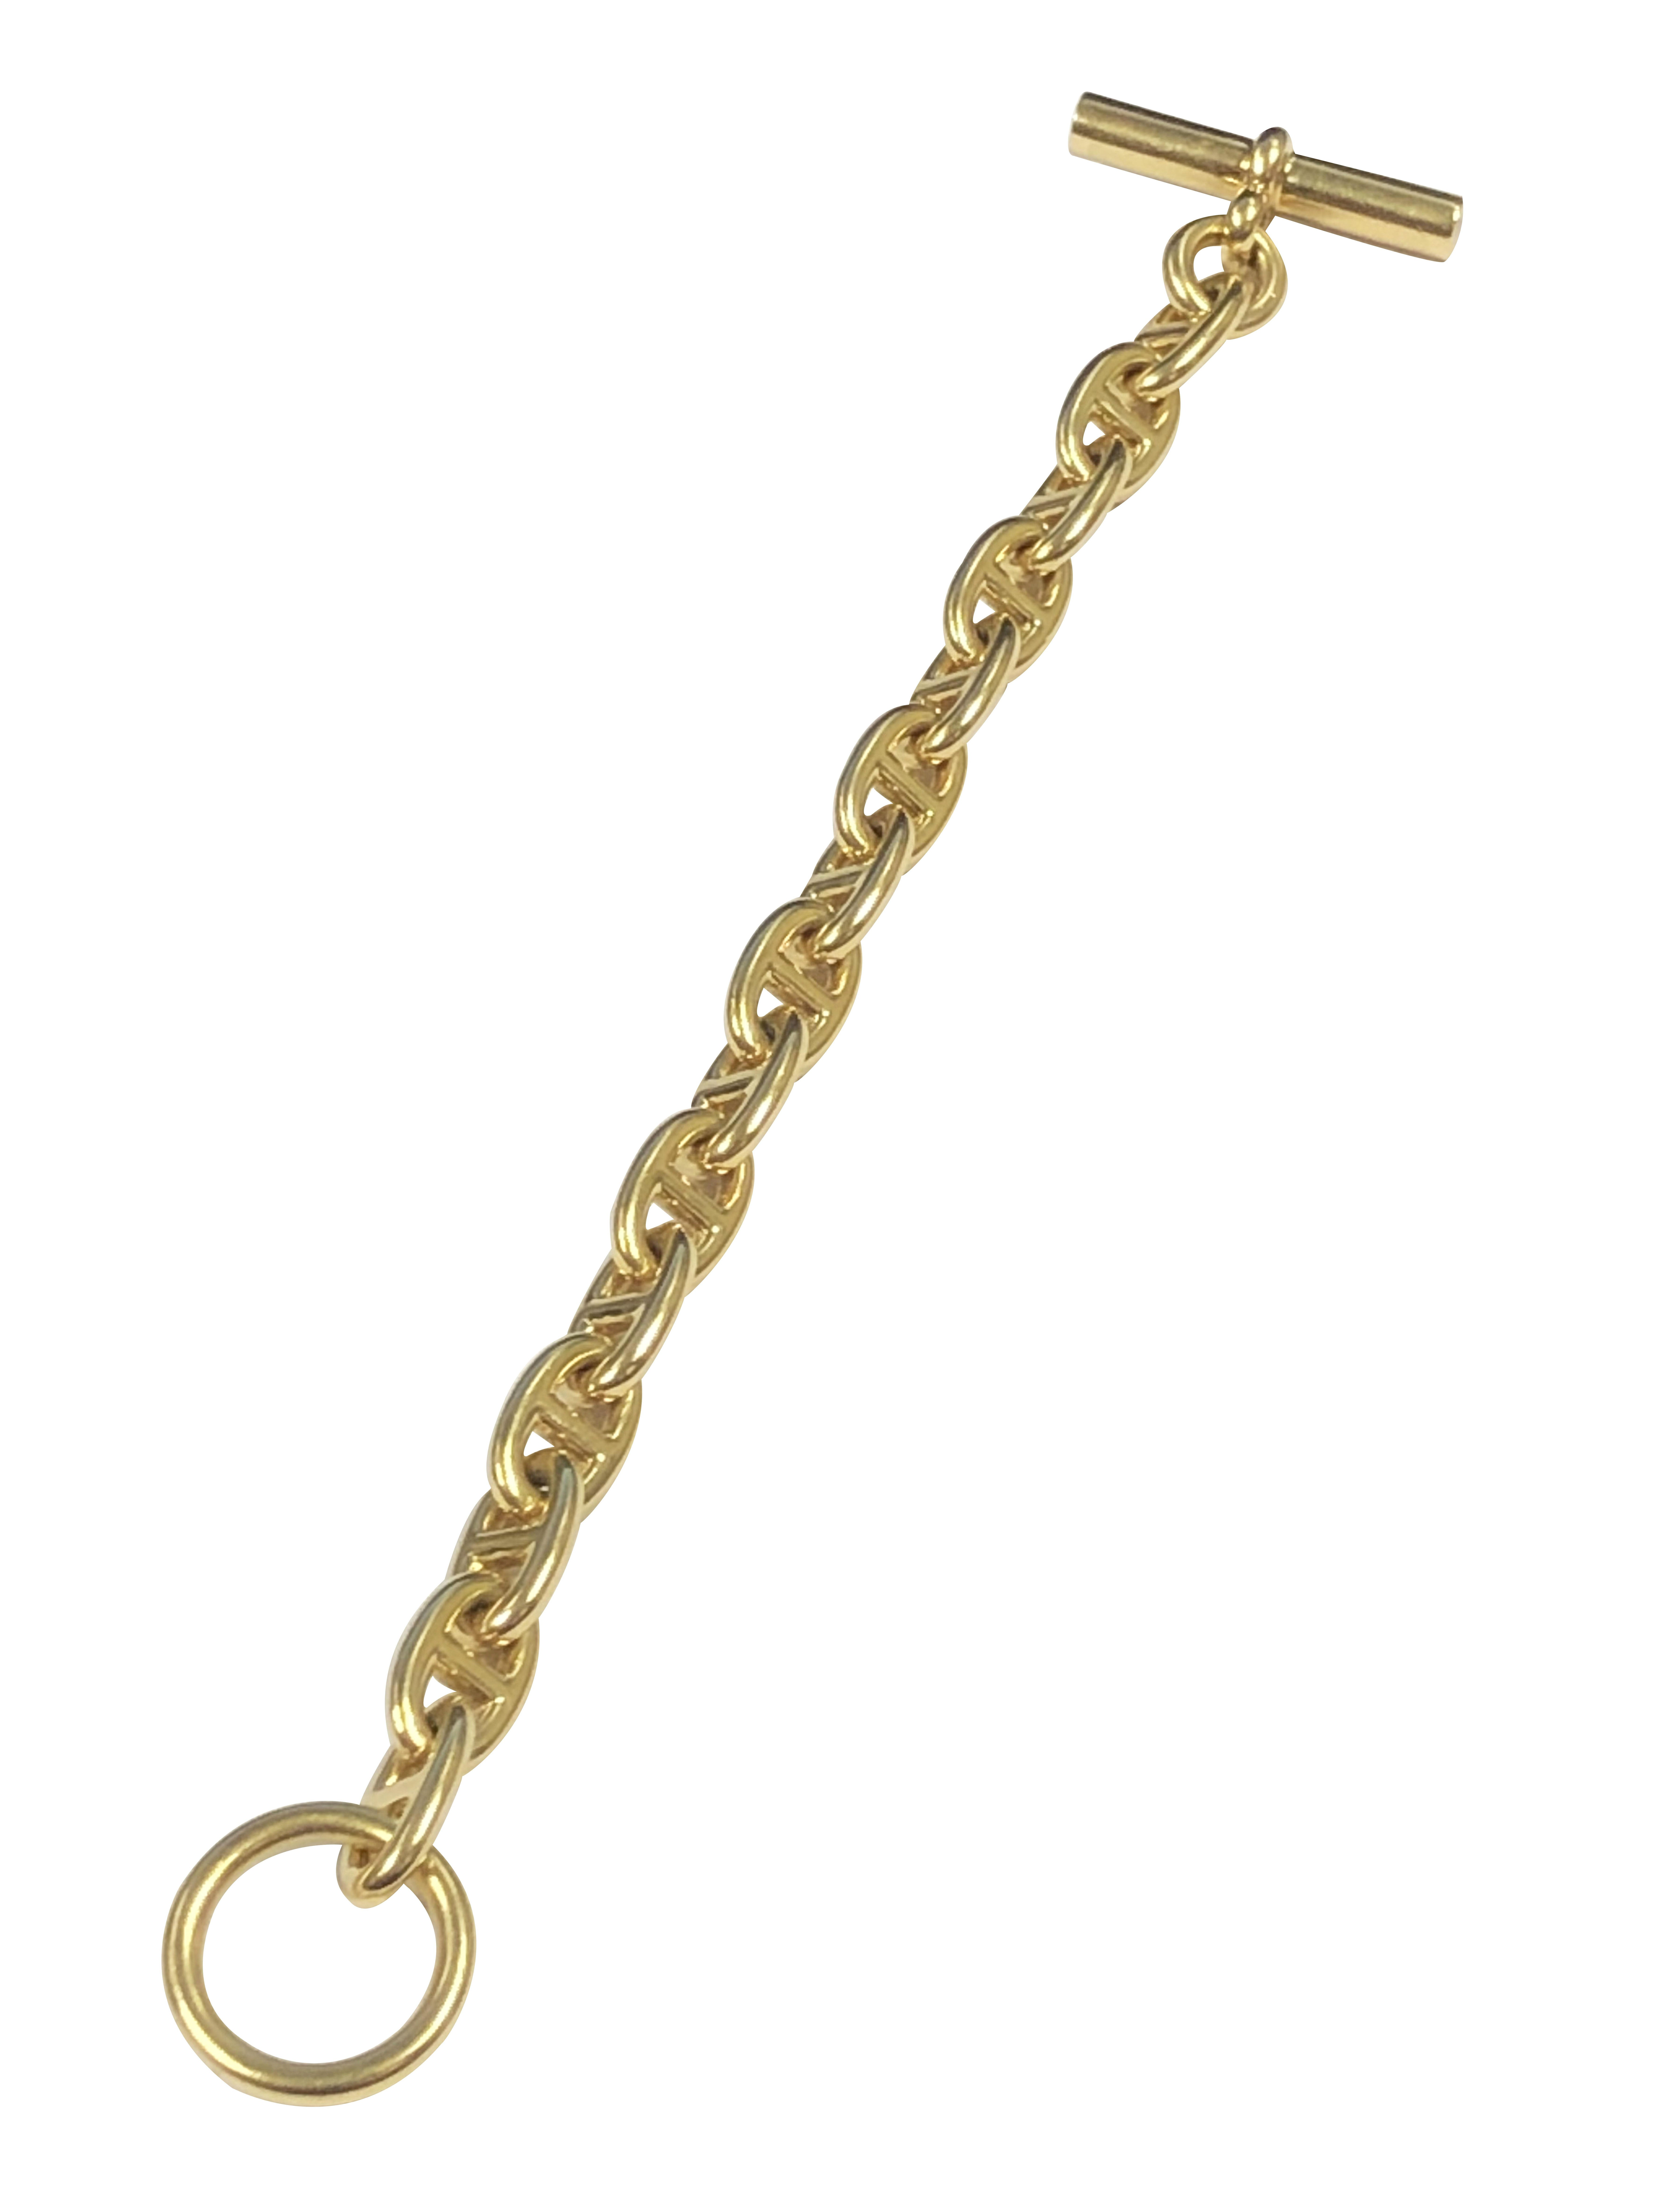 Circa 1990 Hermes Chain D' Ancre 18K Yellow Gold Bracelet, measuring 8 inches in length with 3/8 inch wide links, the solid link constructed bracelet weighs 74 Grams. Signed, Numbered and Having French stamps. Comes in Hermes Presentation box with